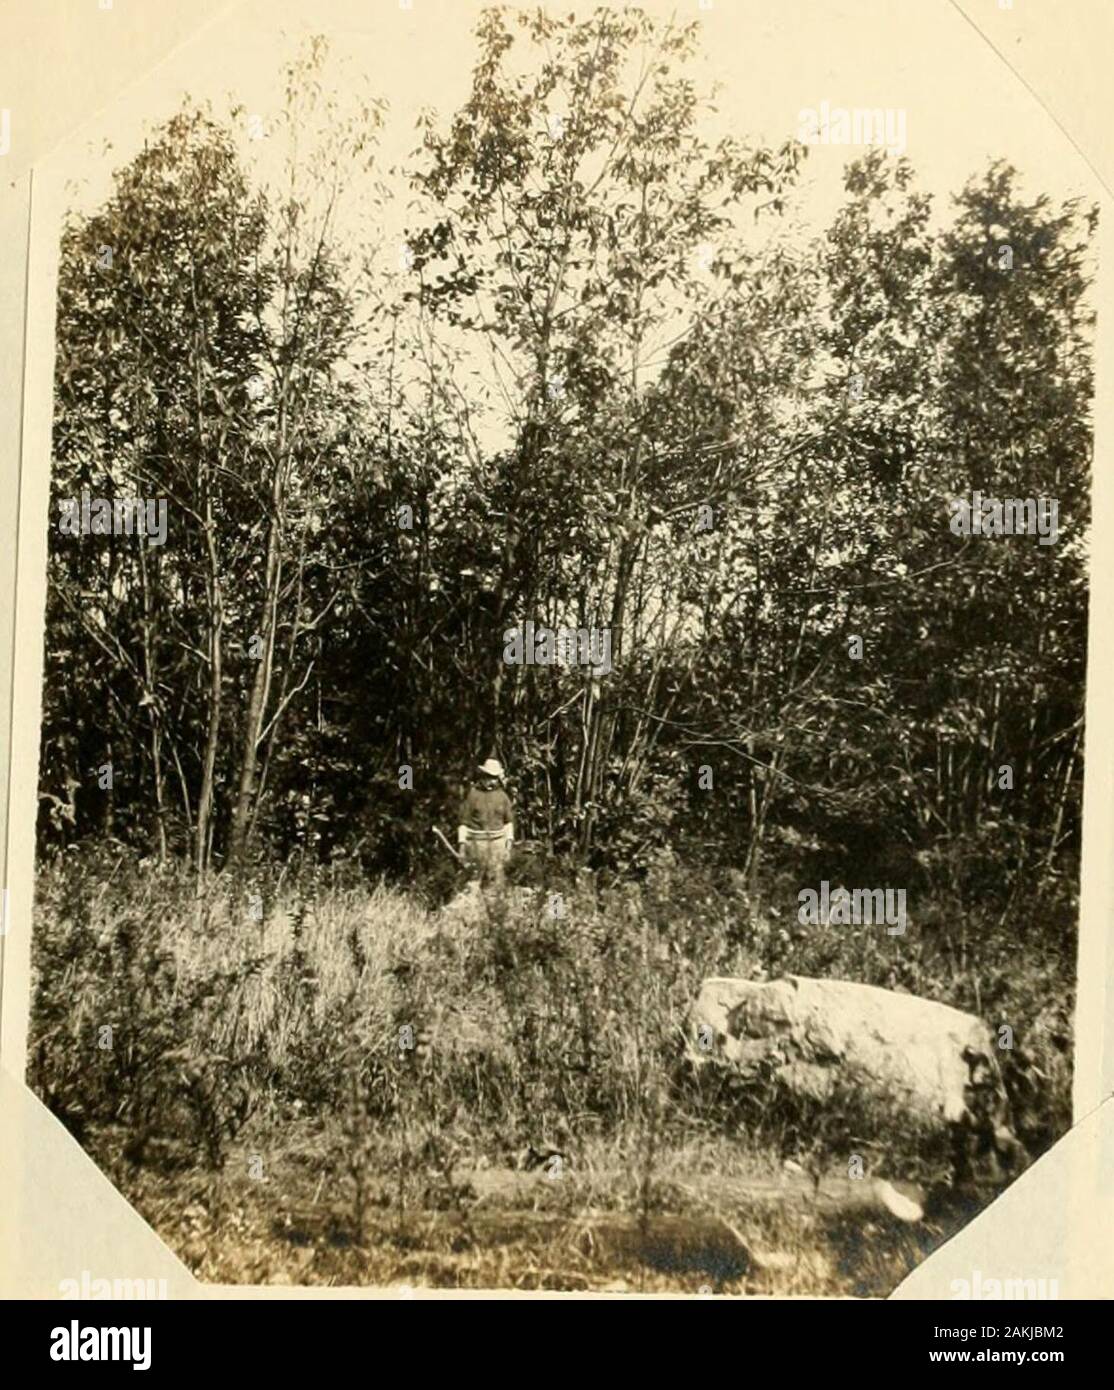 Report on a preliminary examination of the forest land of the United States Naval powder depot near Dover, New Jersey . Exhibit # 1. Hemlock standards and understory of smallpole ir.ixed hardwoods.. *^^*13! -iS Exhibit ir ?. Twelve year old mixed hardwood sproutssmall poles. c^ Stock Photo